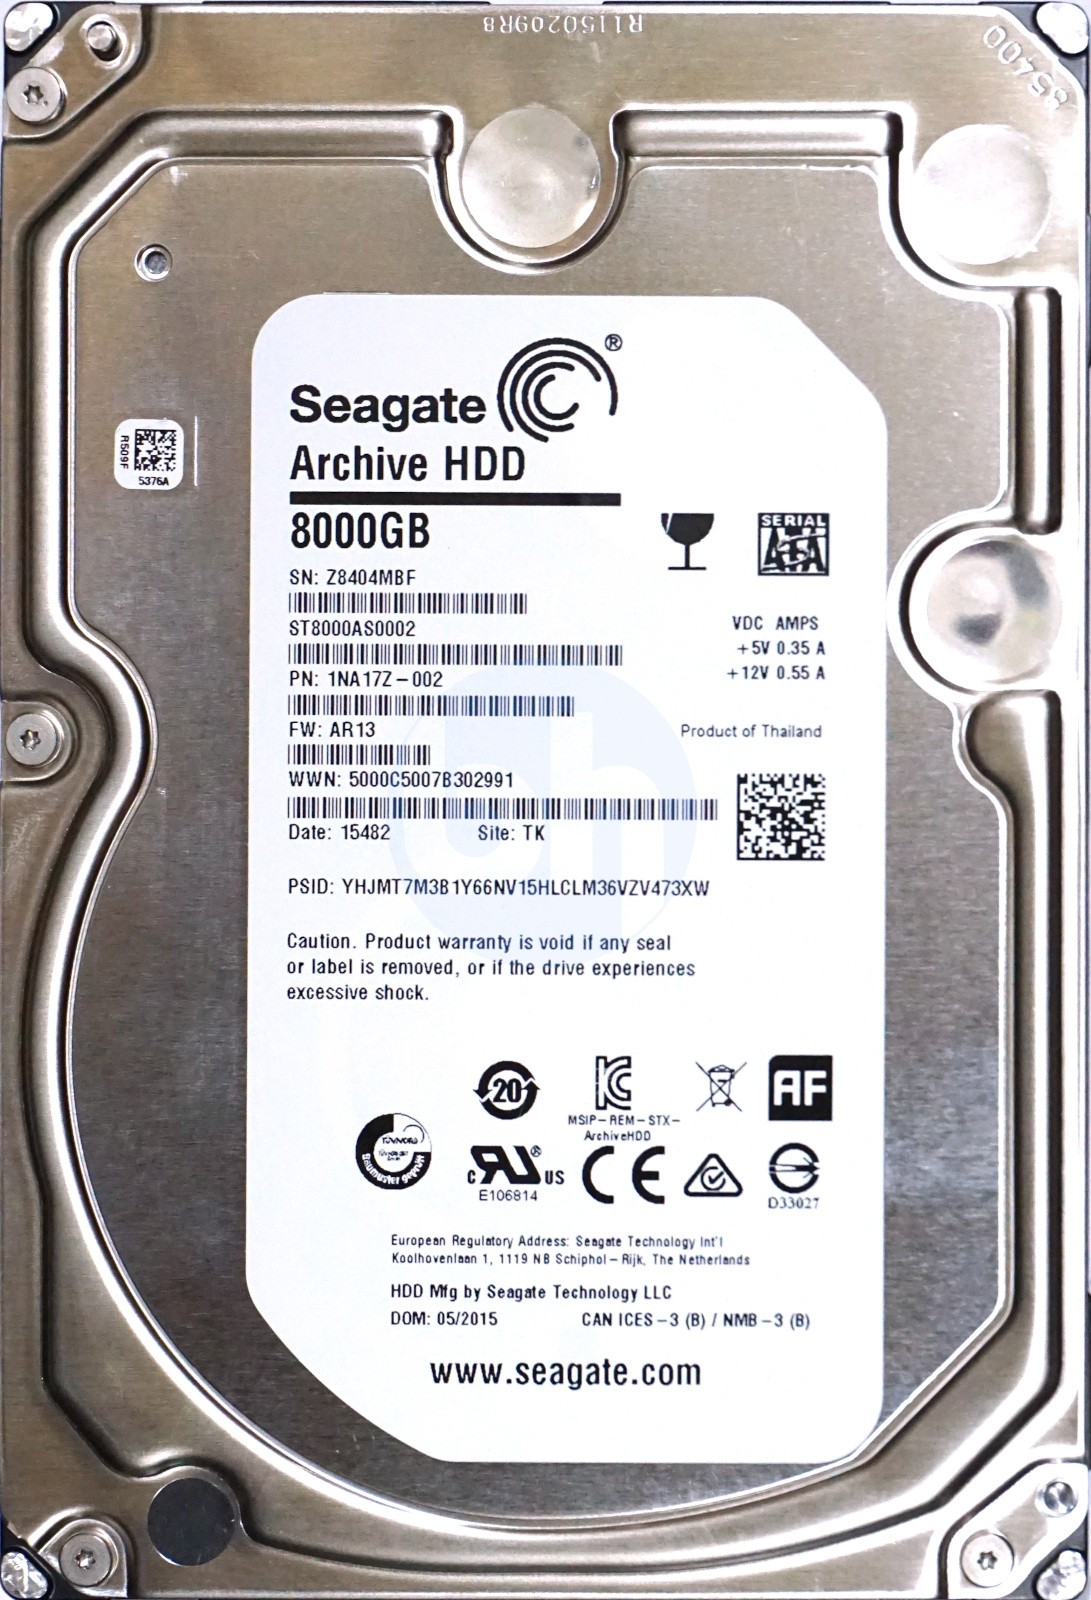 Seagate (ST8000AS0002) 8TB Archive SATA-III (3.5") 6Gbps 5.9K HDD